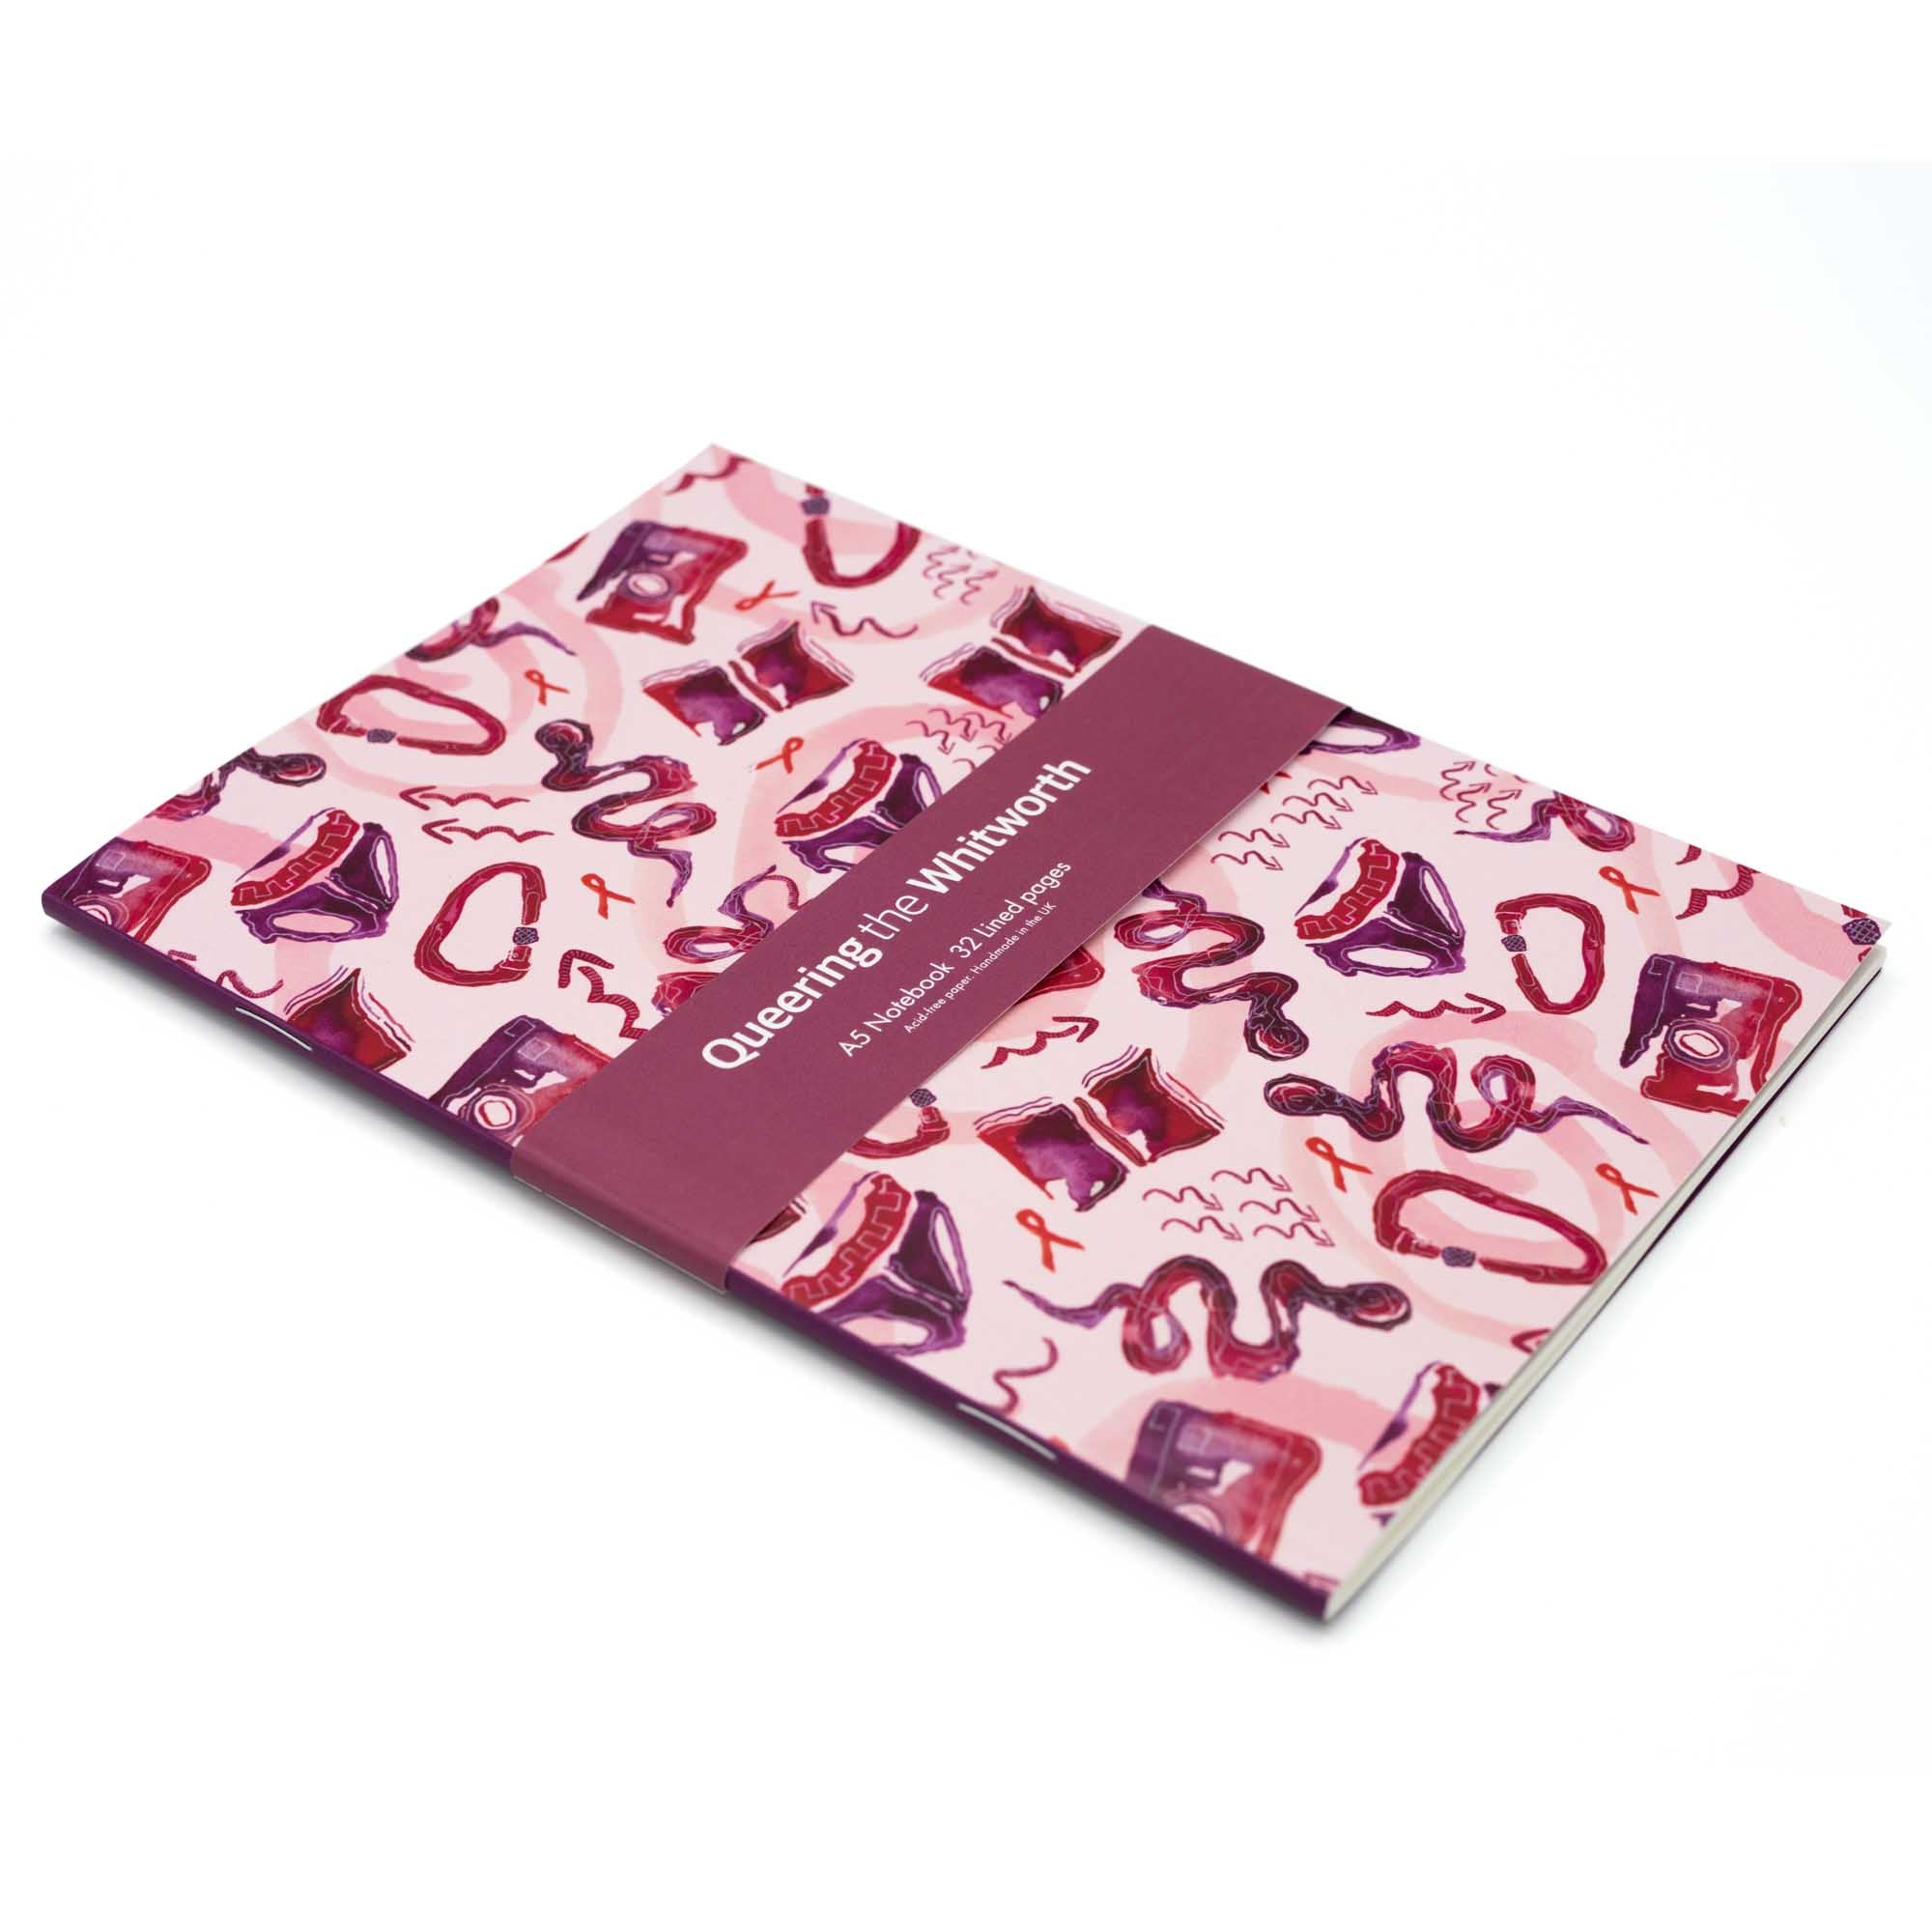 Notebook with print by Sarah-Joy Ford againt a white background. Pink, red and purple pattern design. 